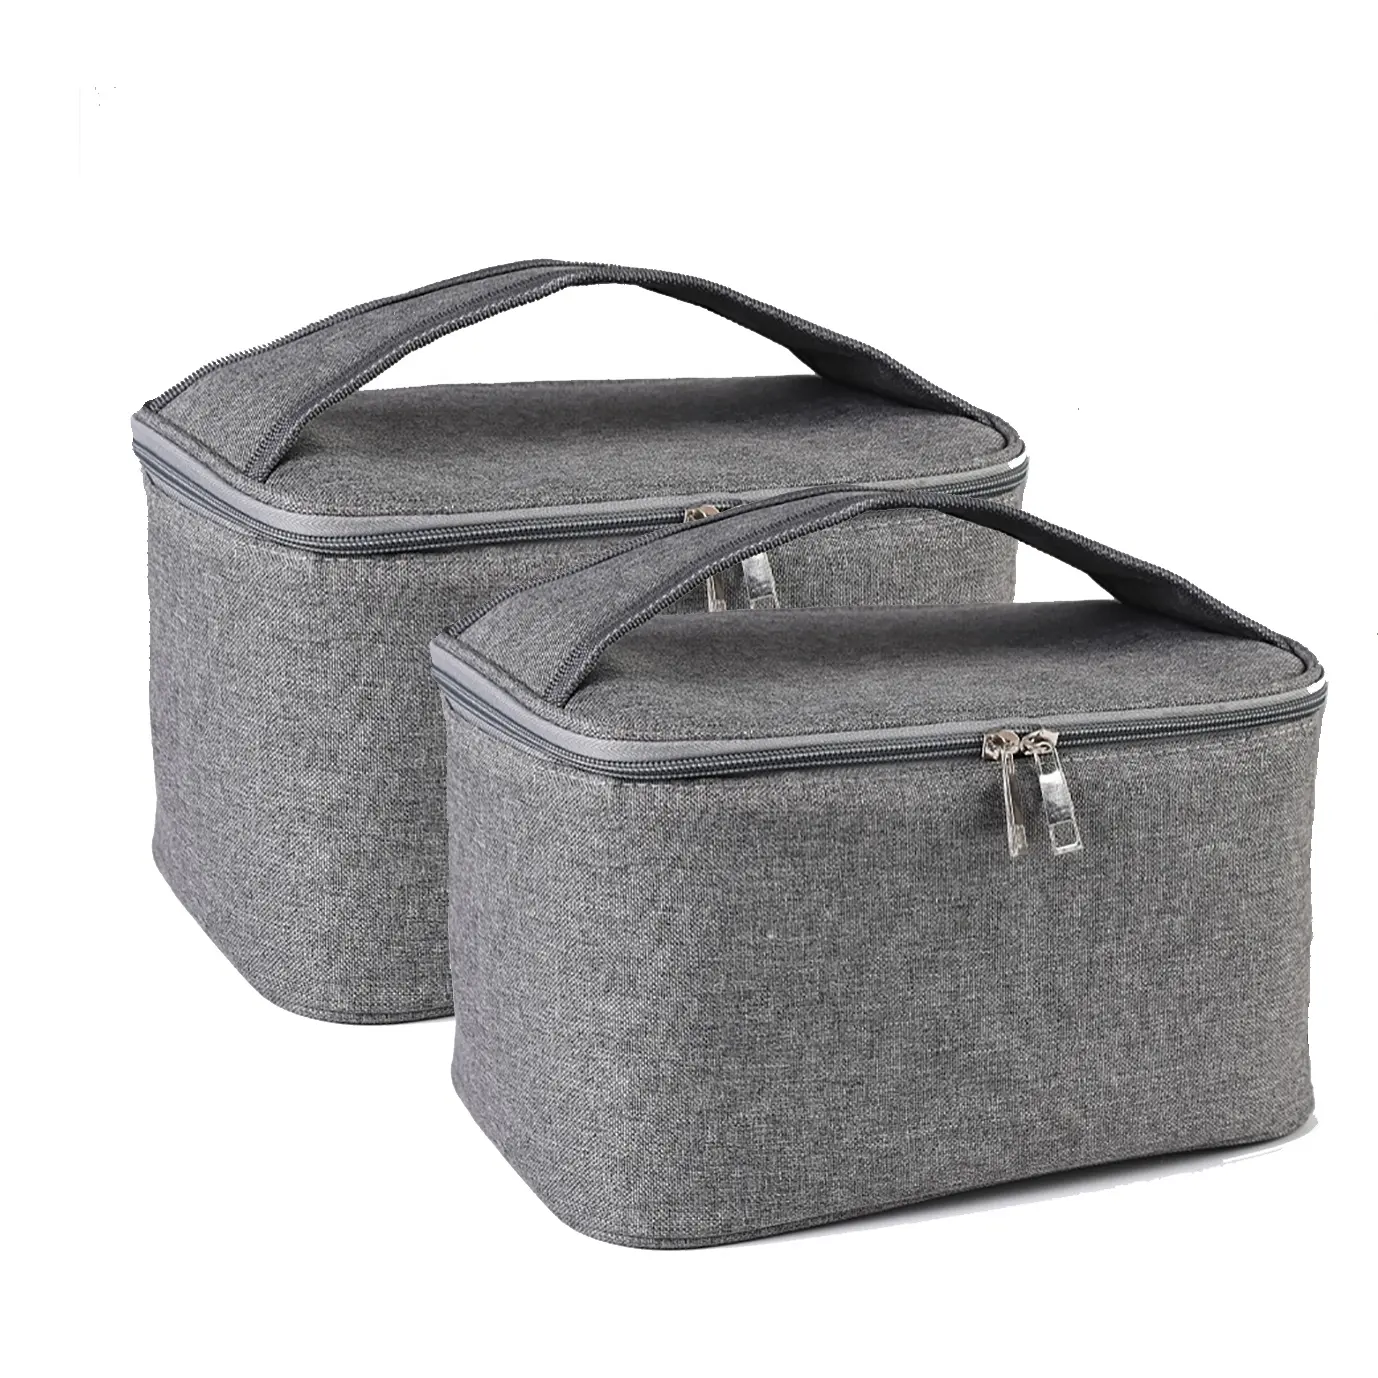 Lunch Bag Cooler Bags Portable Cooler Lunch Bag New Customized Nylon Polyester Grey Soft Lunch Bag Insulated Tote Bag For Outdoor Travel